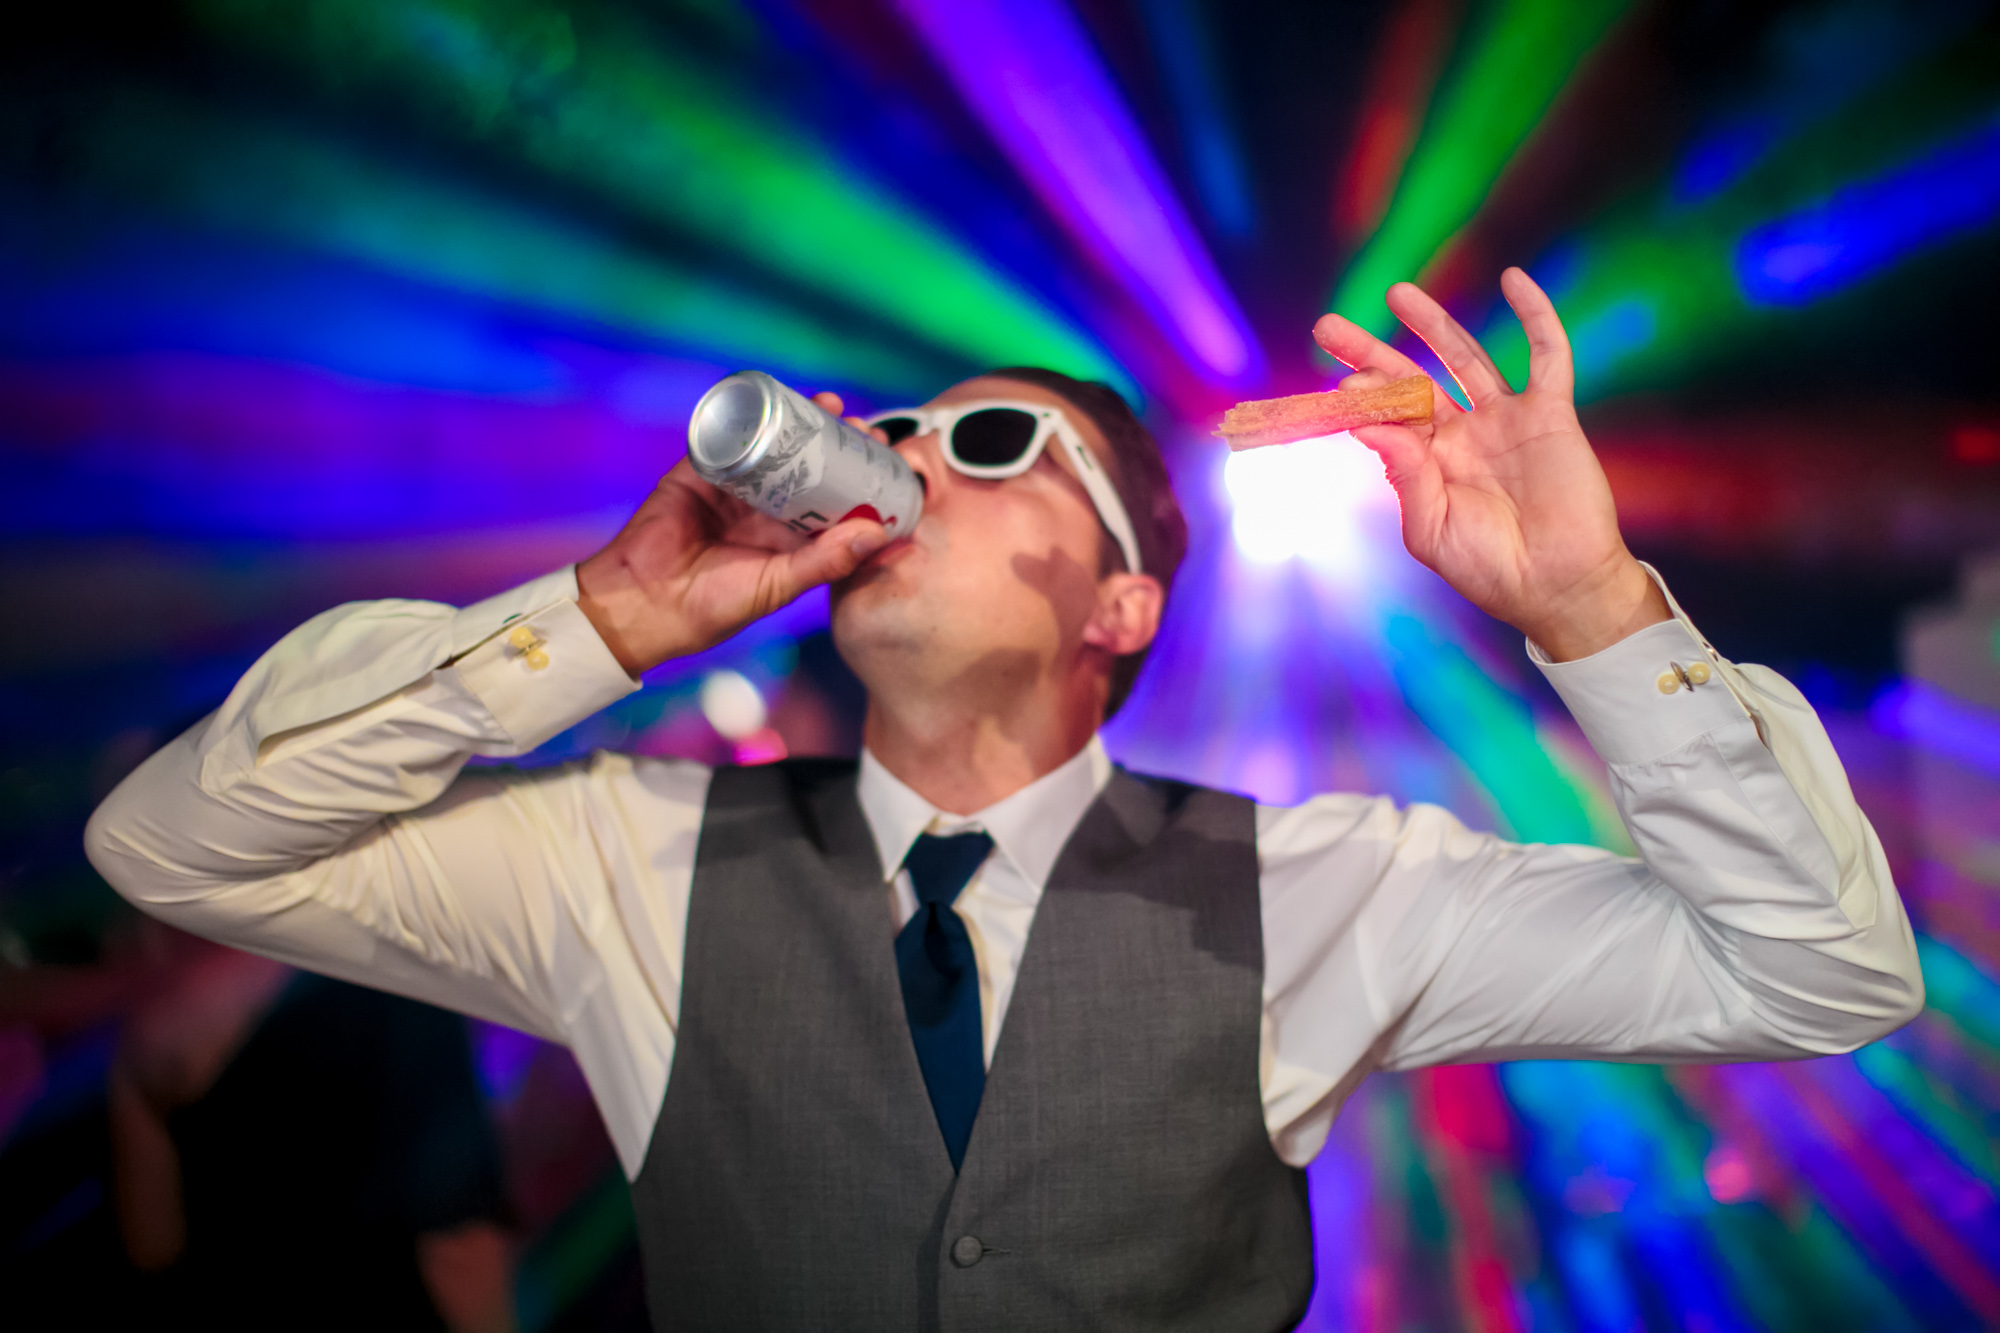 Man dances while drinking a beer and holding a churro in front of a colorful strobe light.